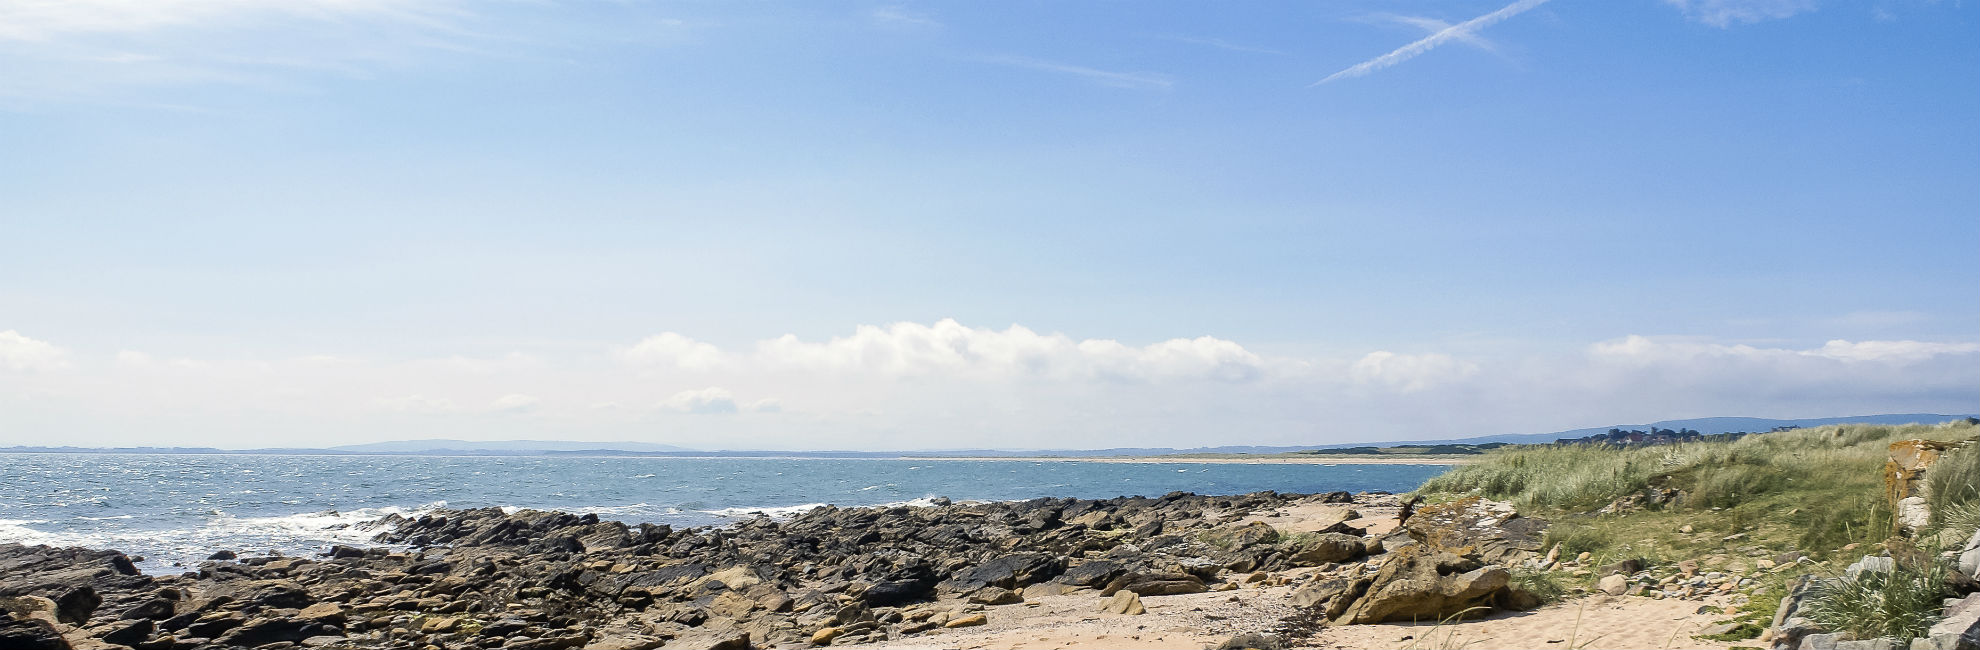 Looking out to sea from the rocky coastline of Dornoch in Scotland